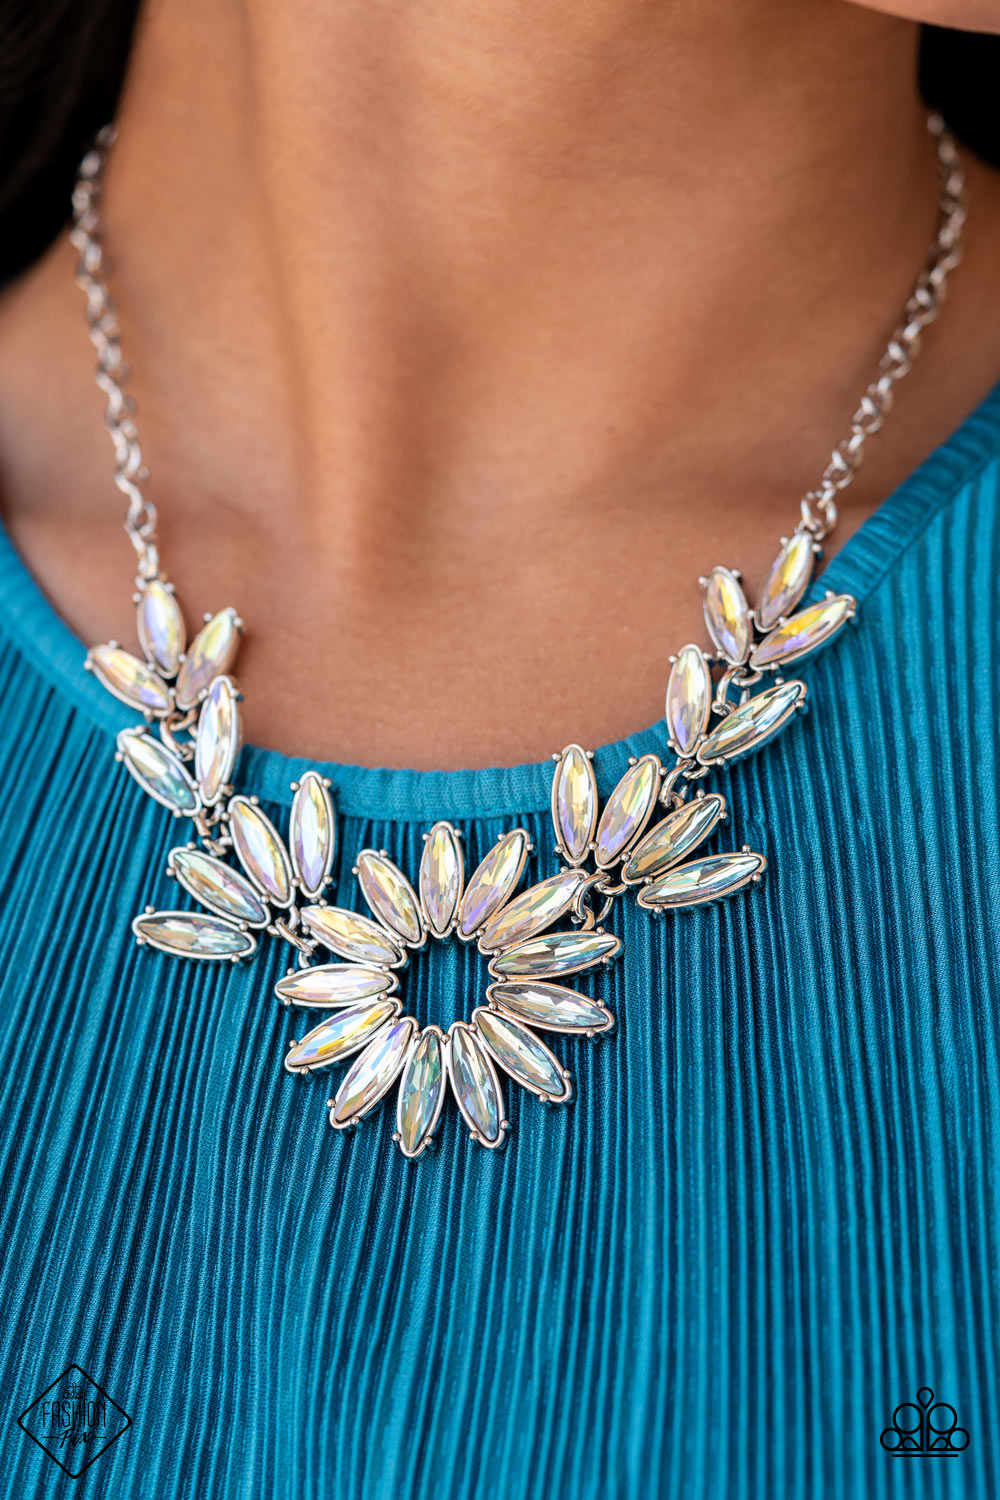 Celestial Cruise - Multi Iridescent Gem Flower Inspired Paparazzi Necklace & matching earrings